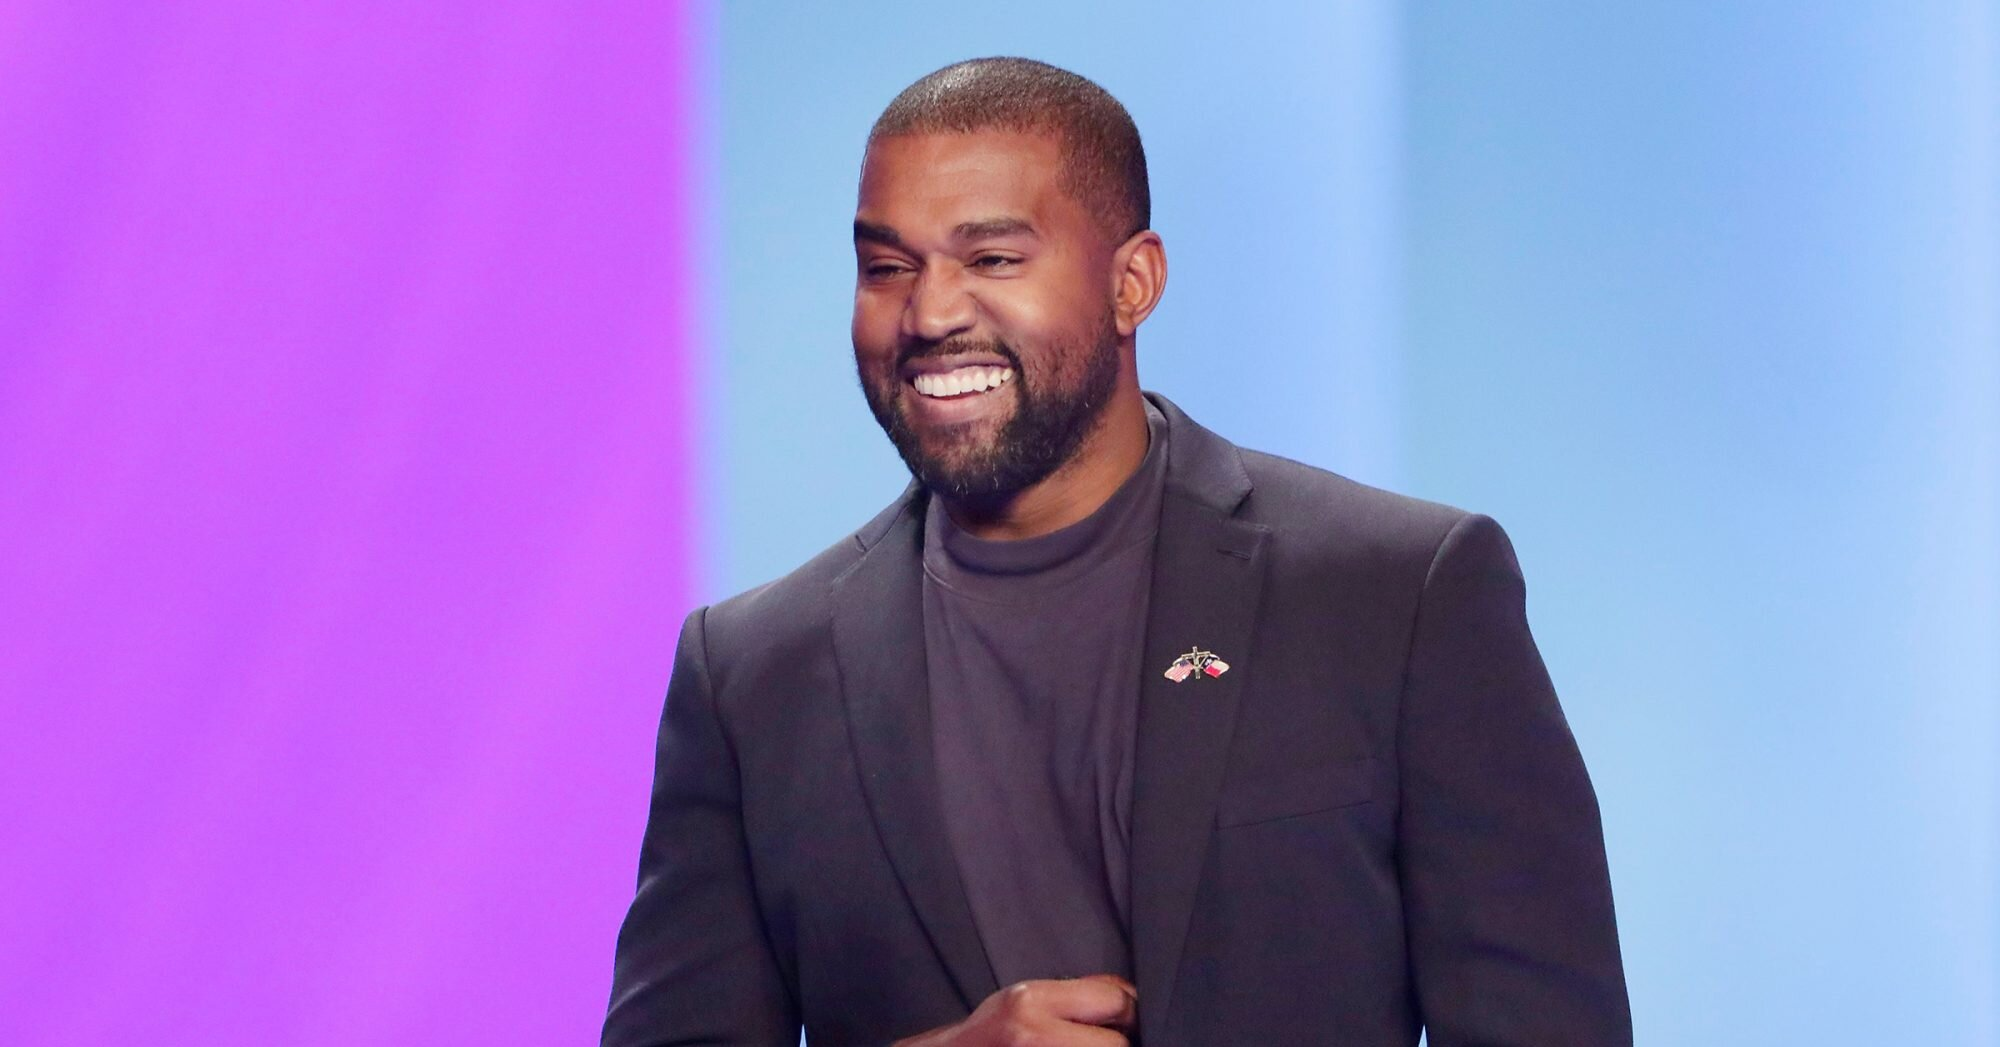 Kanye West Says He's Running for President: What He'd Need to Do by November to Be Taken Seriously